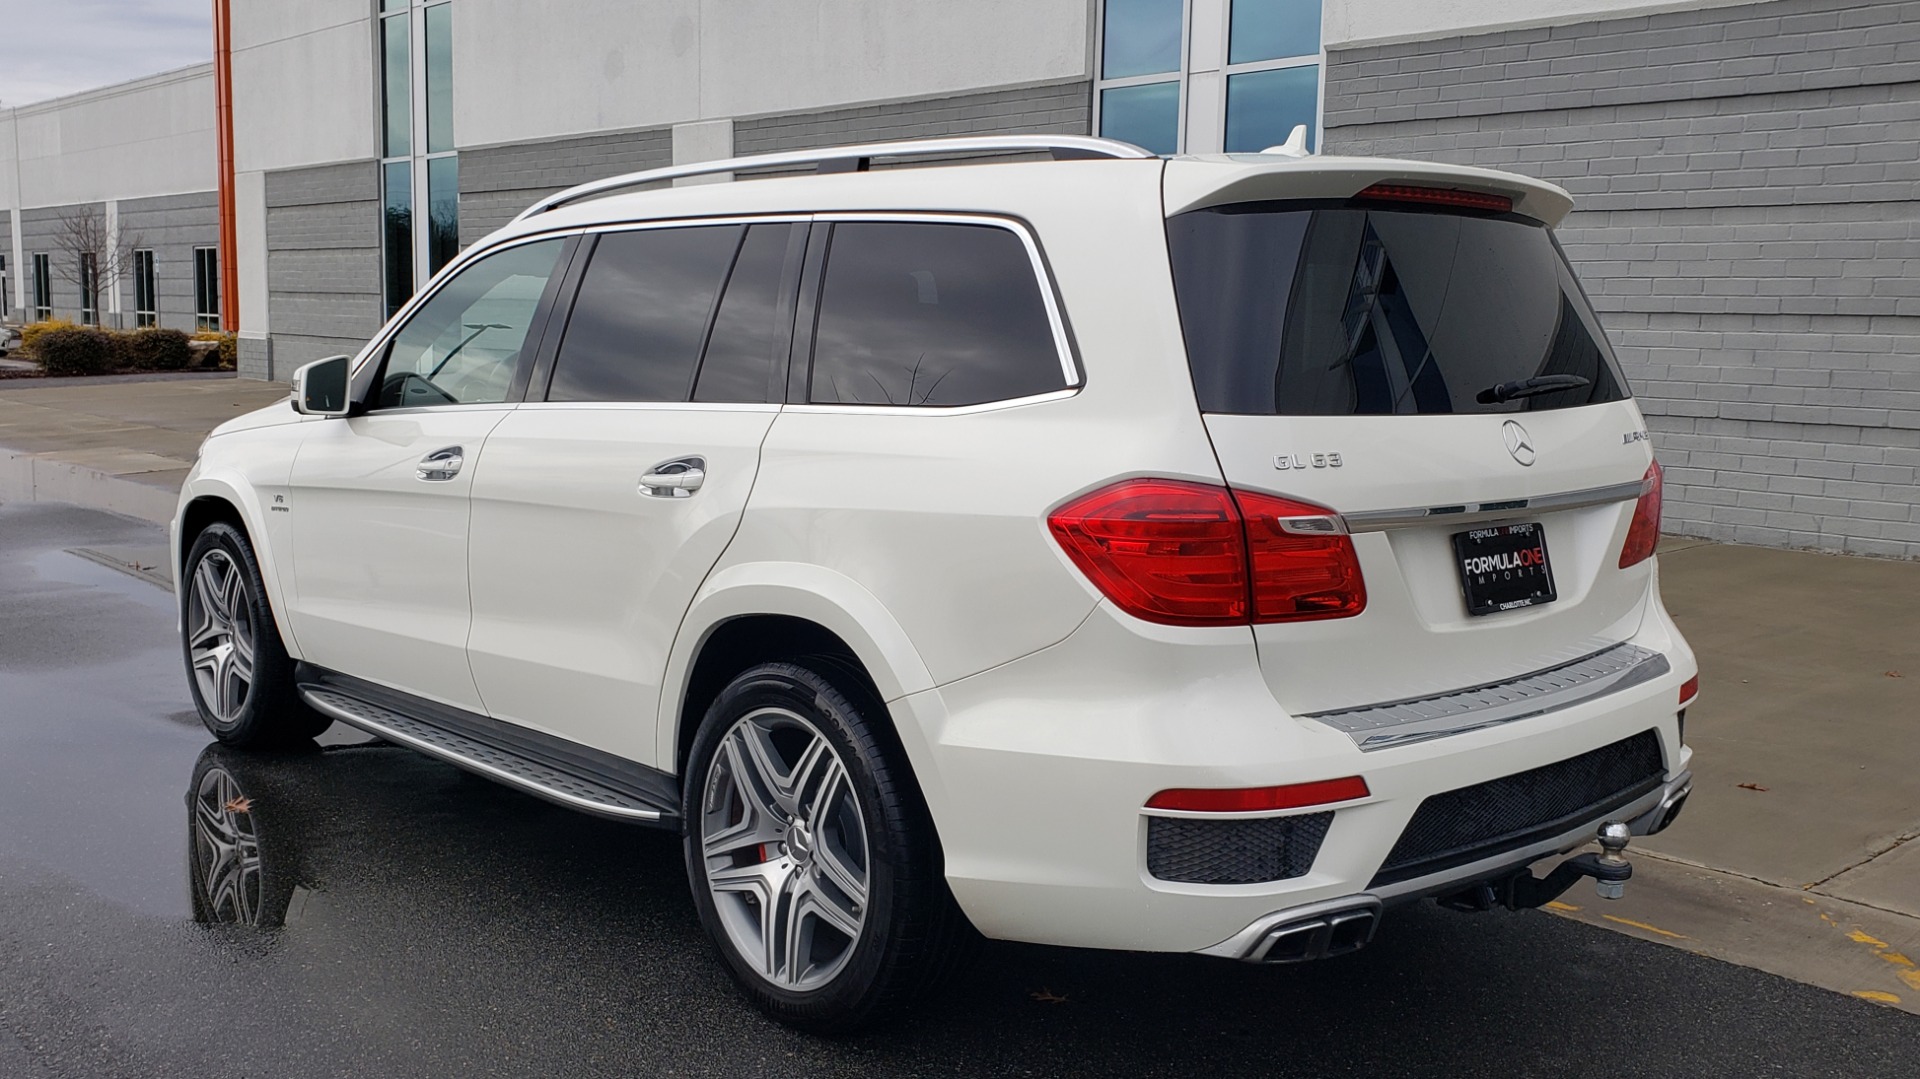 Used 2014 Mercedes-Benz GL-CLASS GL 63 AMG 4MATIC / NIGHT VIEW ASSIST PLUS / BANG & OLUFSEN SND for sale Sold at Formula Imports in Charlotte NC 28227 5